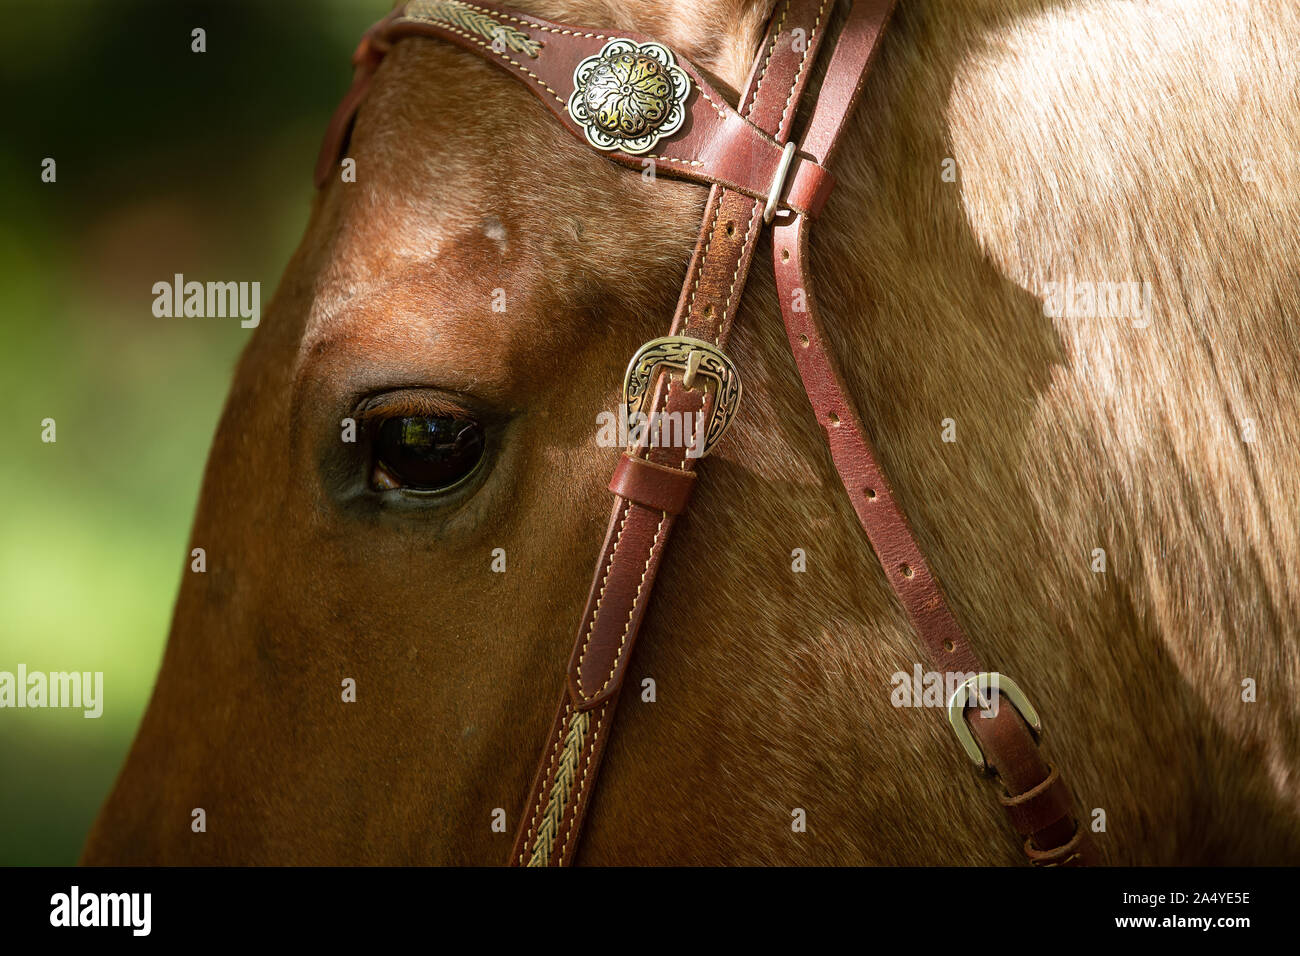 Horse, quarterback Red Roan, neckline of the head, eye and bridle with conchas in close-up. Stock Photo